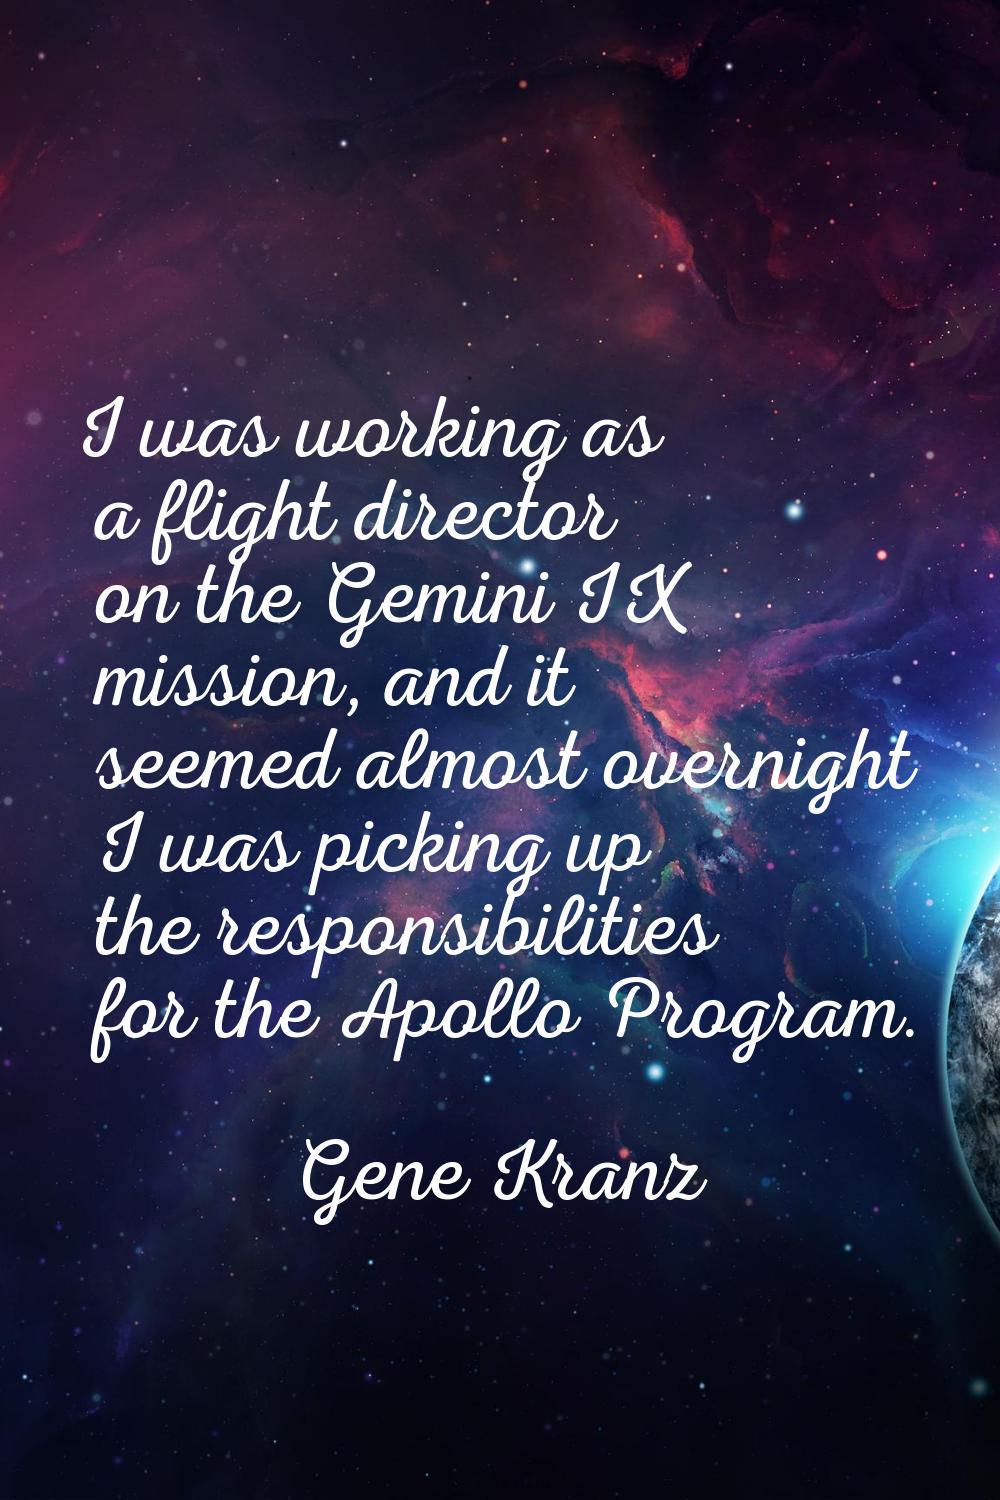 I was working as a flight director on the Gemini IX mission, and it seemed almost overnight I was p